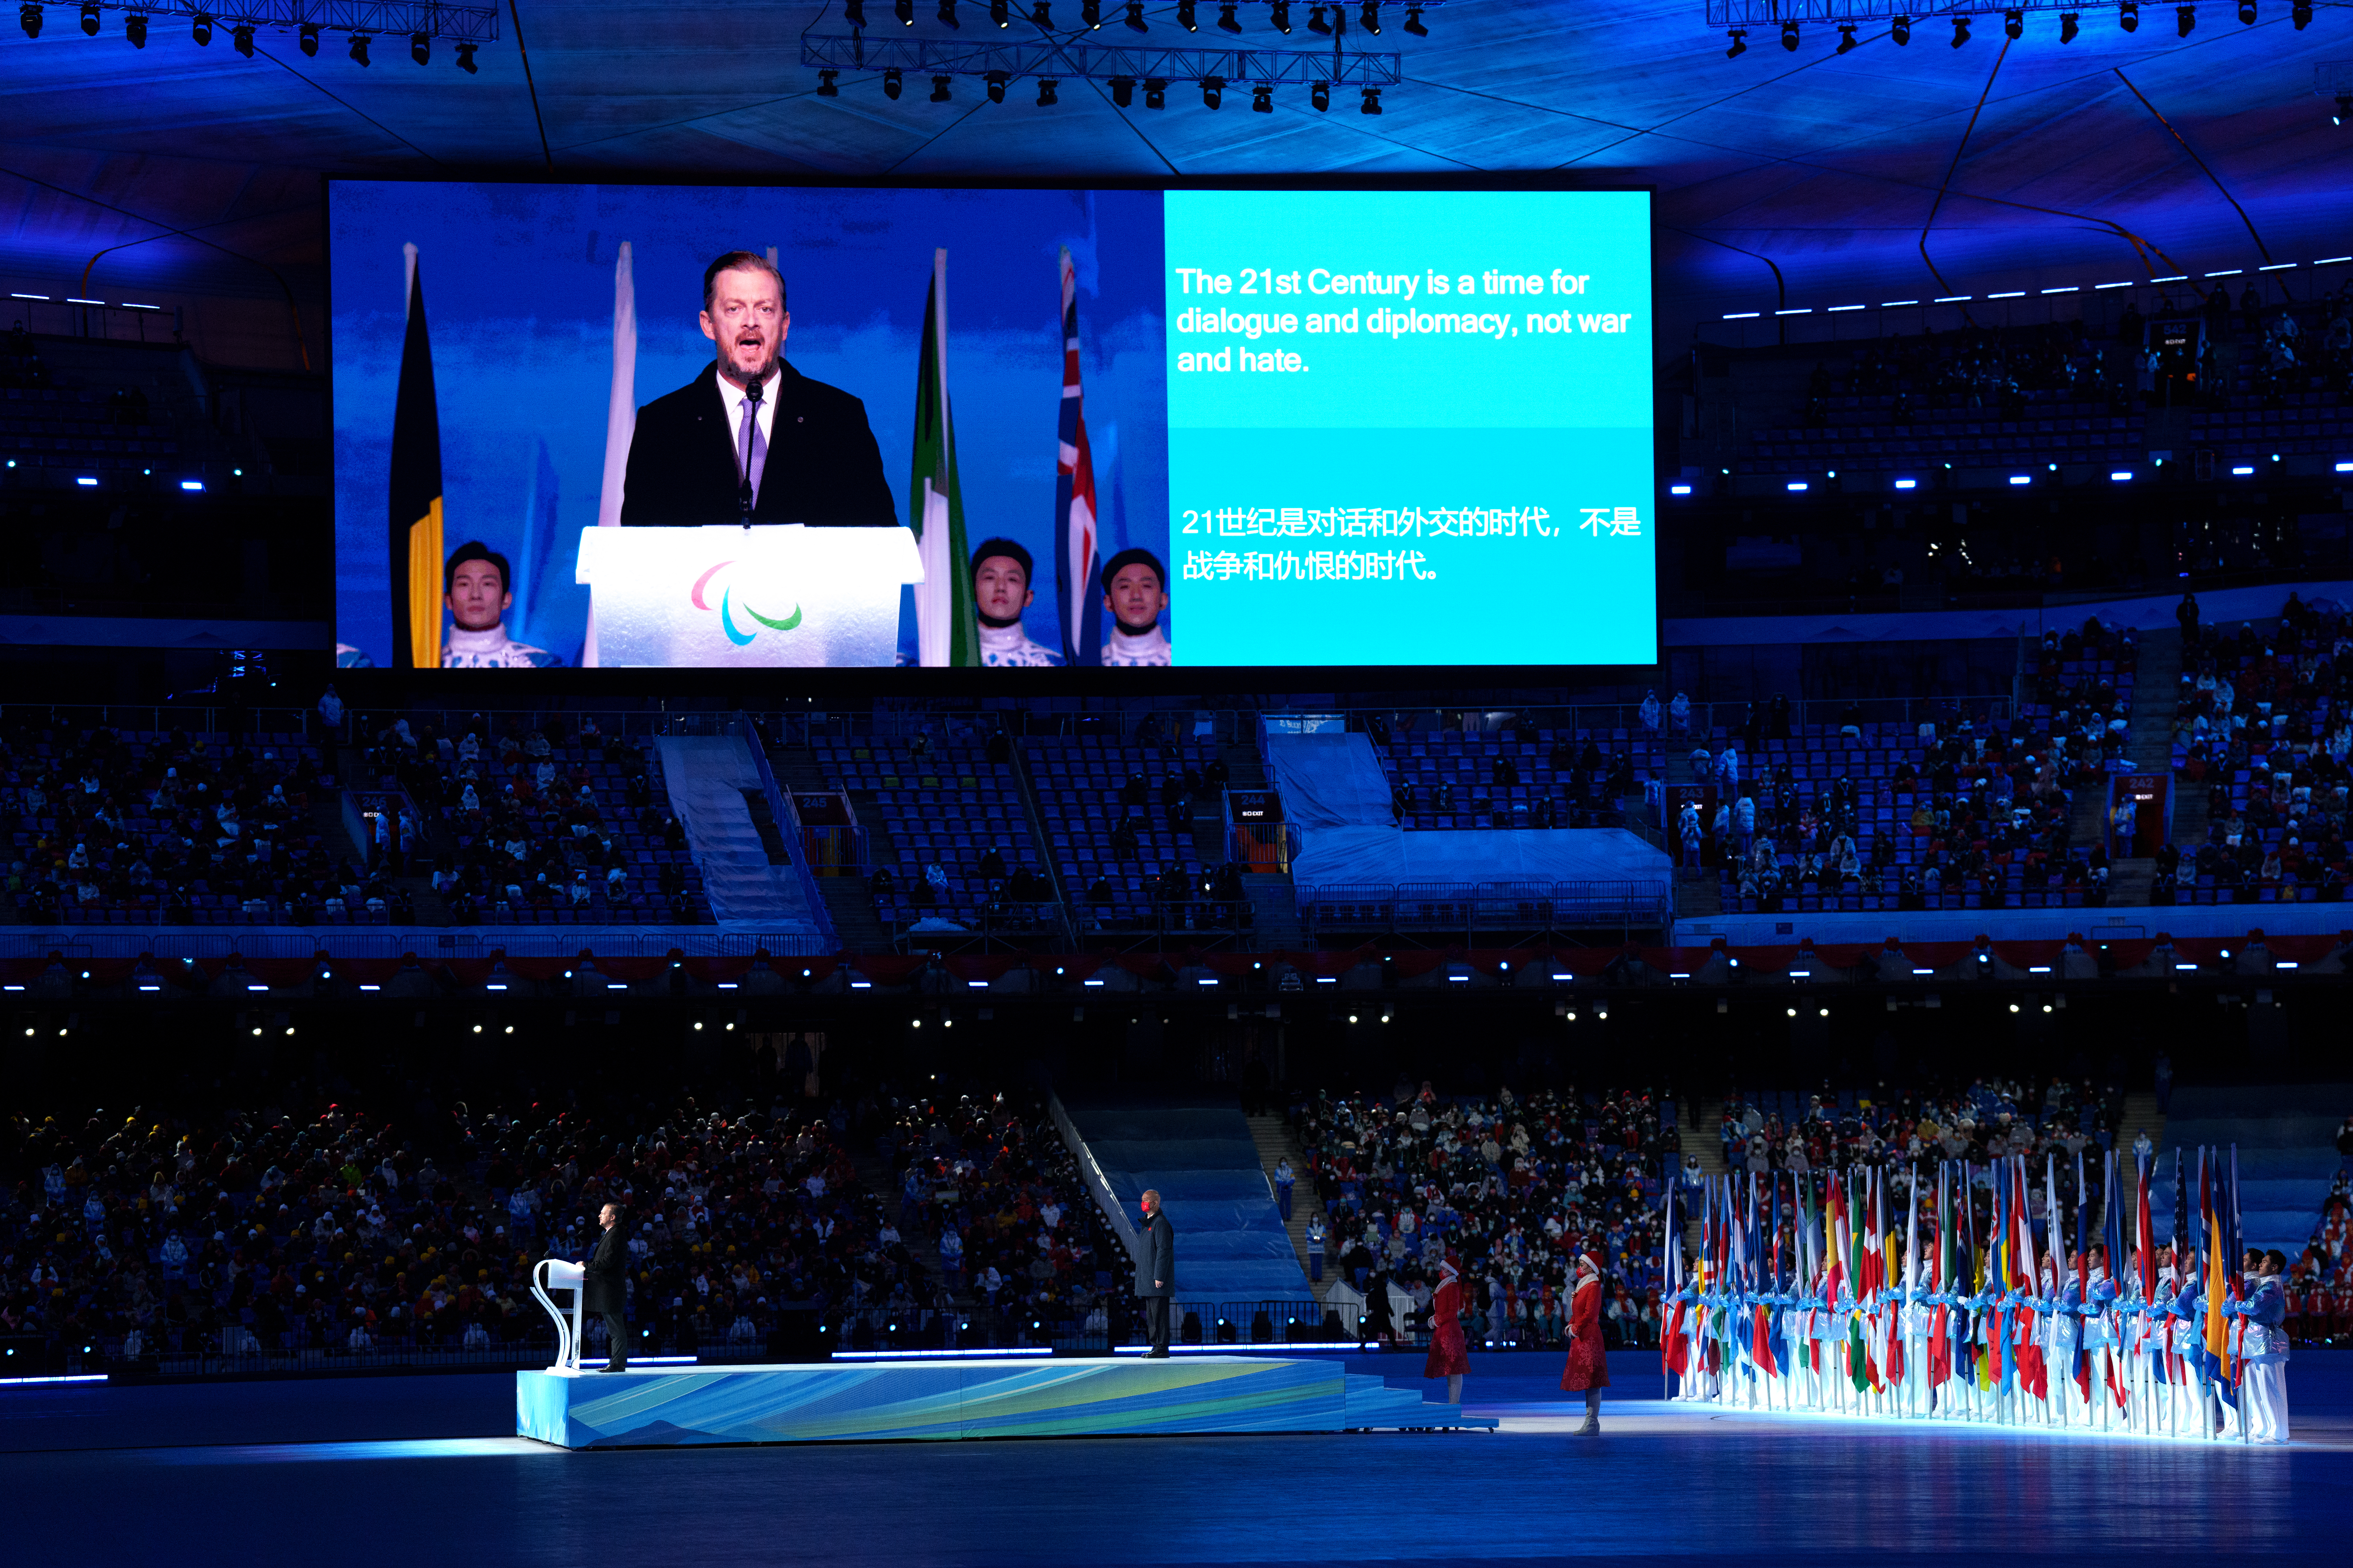 IPC president Andrew Parsons gave an impassioned speech at the opening ceremony of the Beijing 2022 Winter Paralympic Games (Bob Martin for OIS/PA)